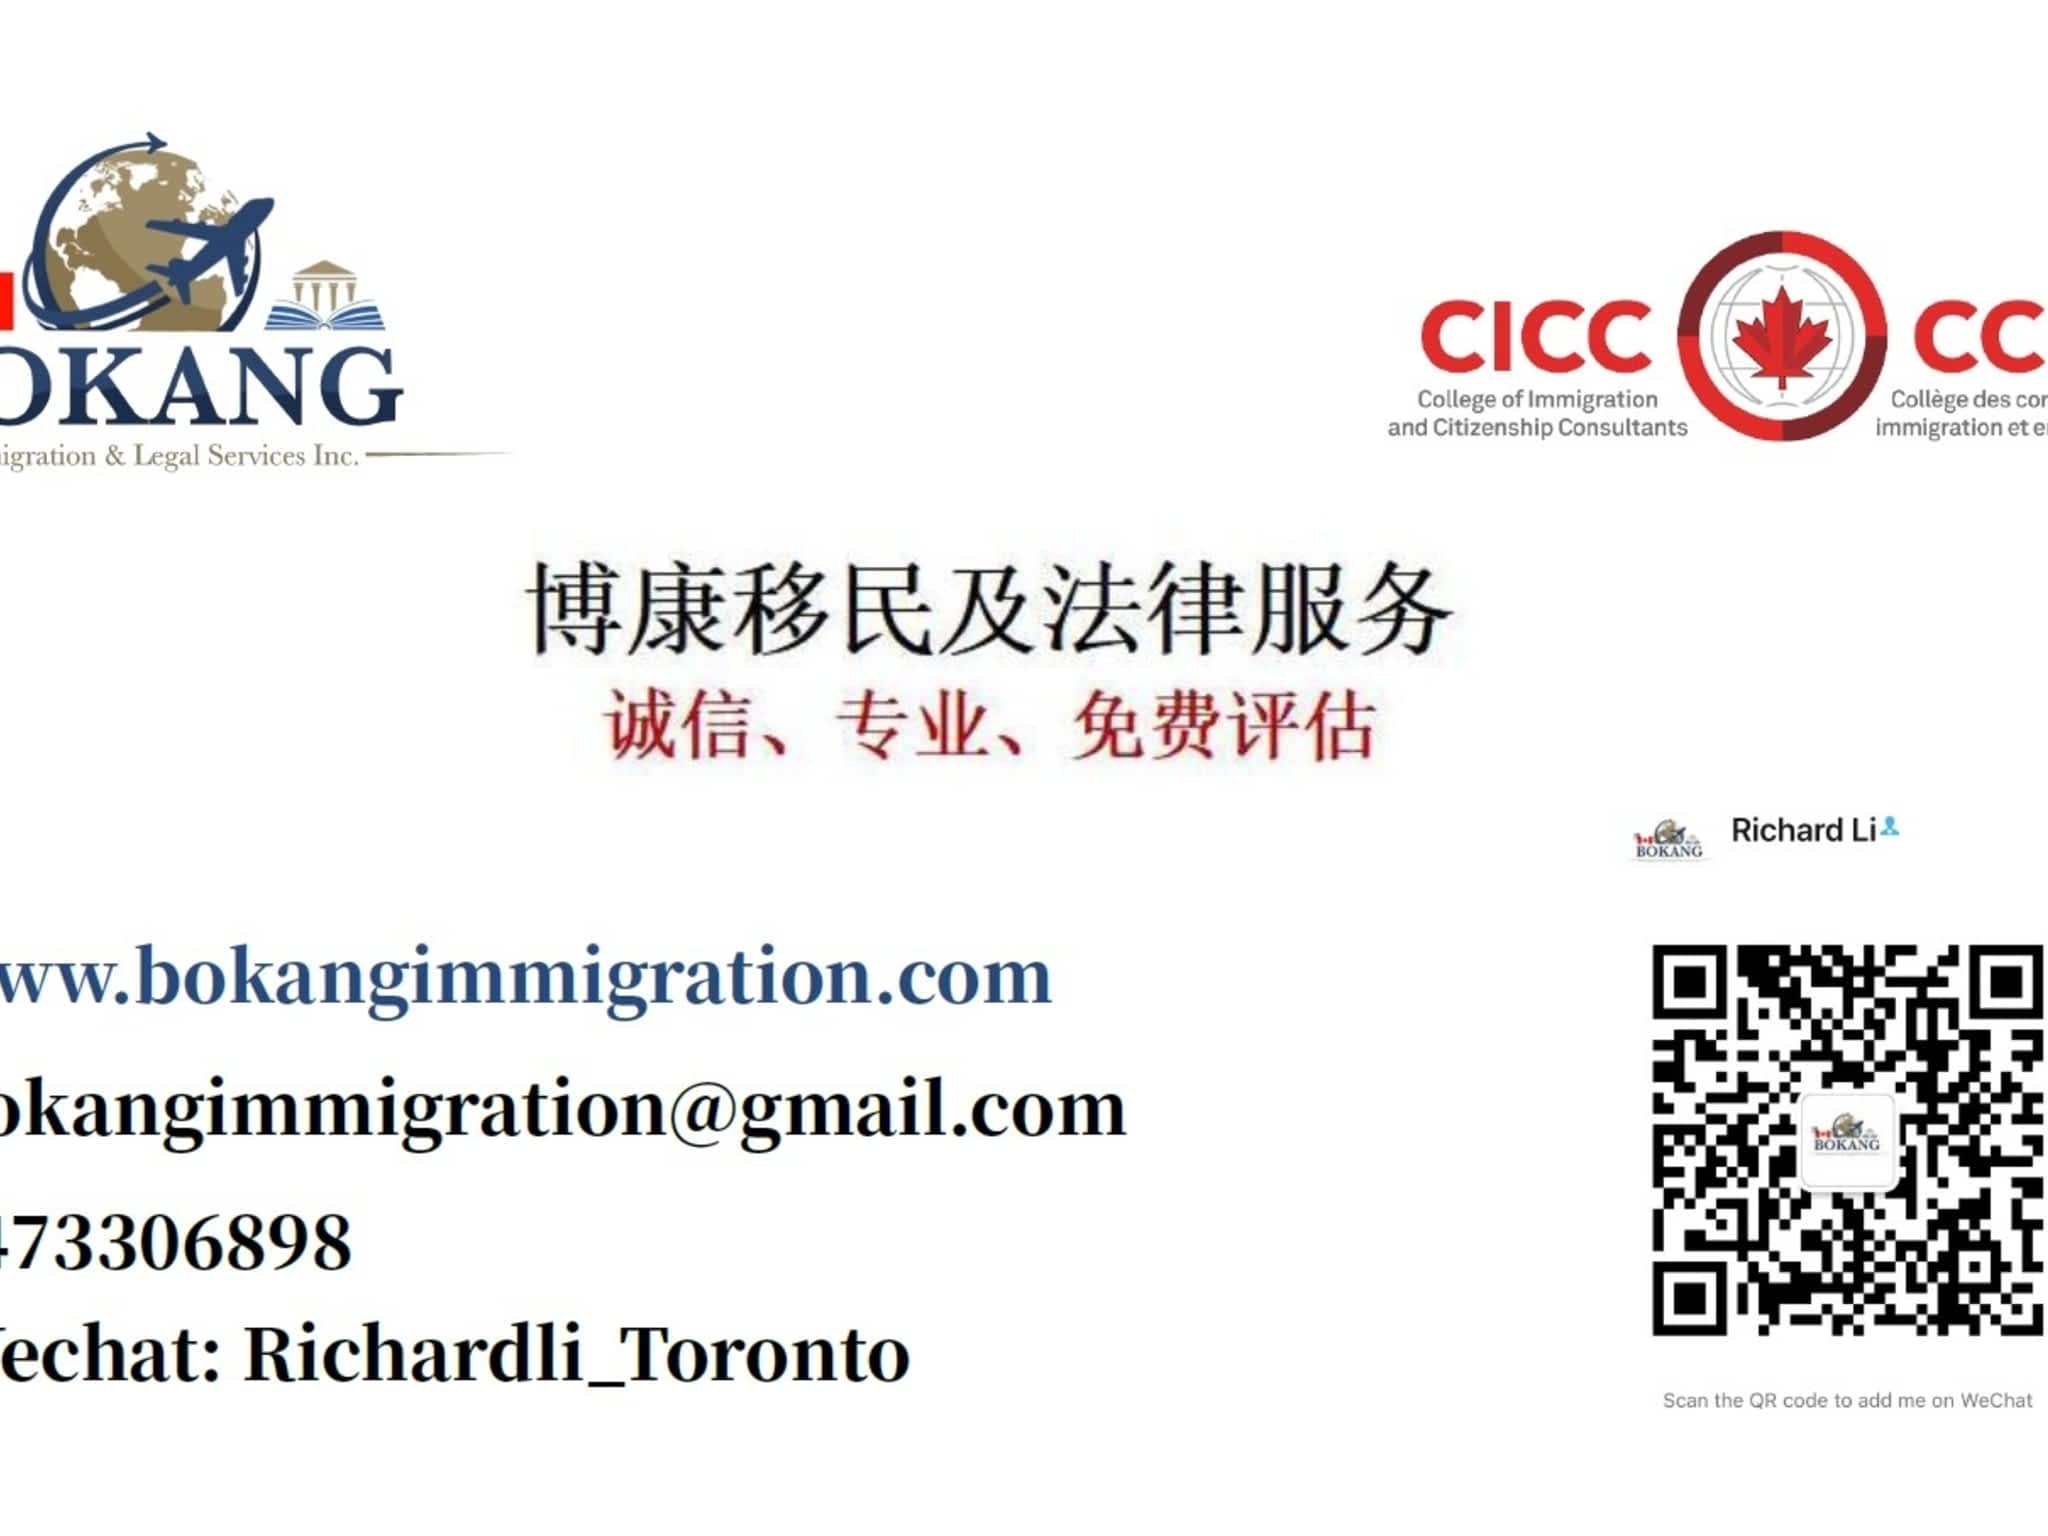 photo Bokang Immigration and Legal Services Inc.